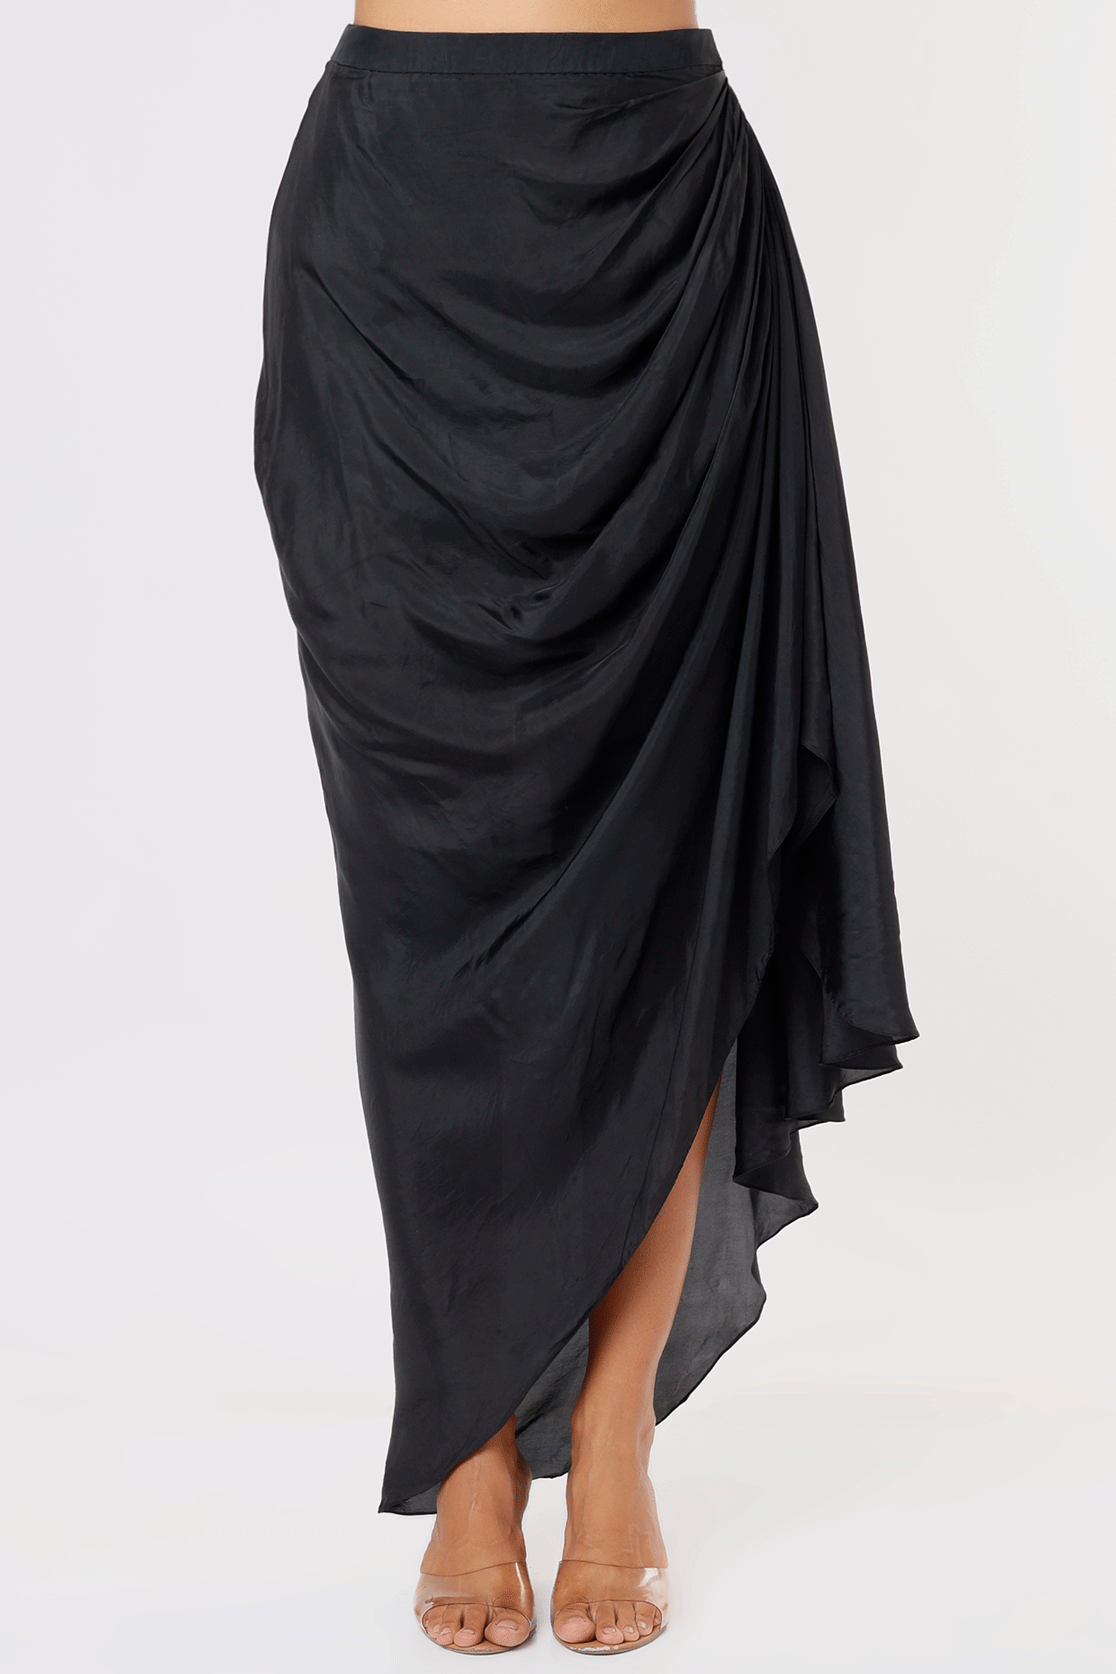 Black Dhoti With Tie Up Blouse